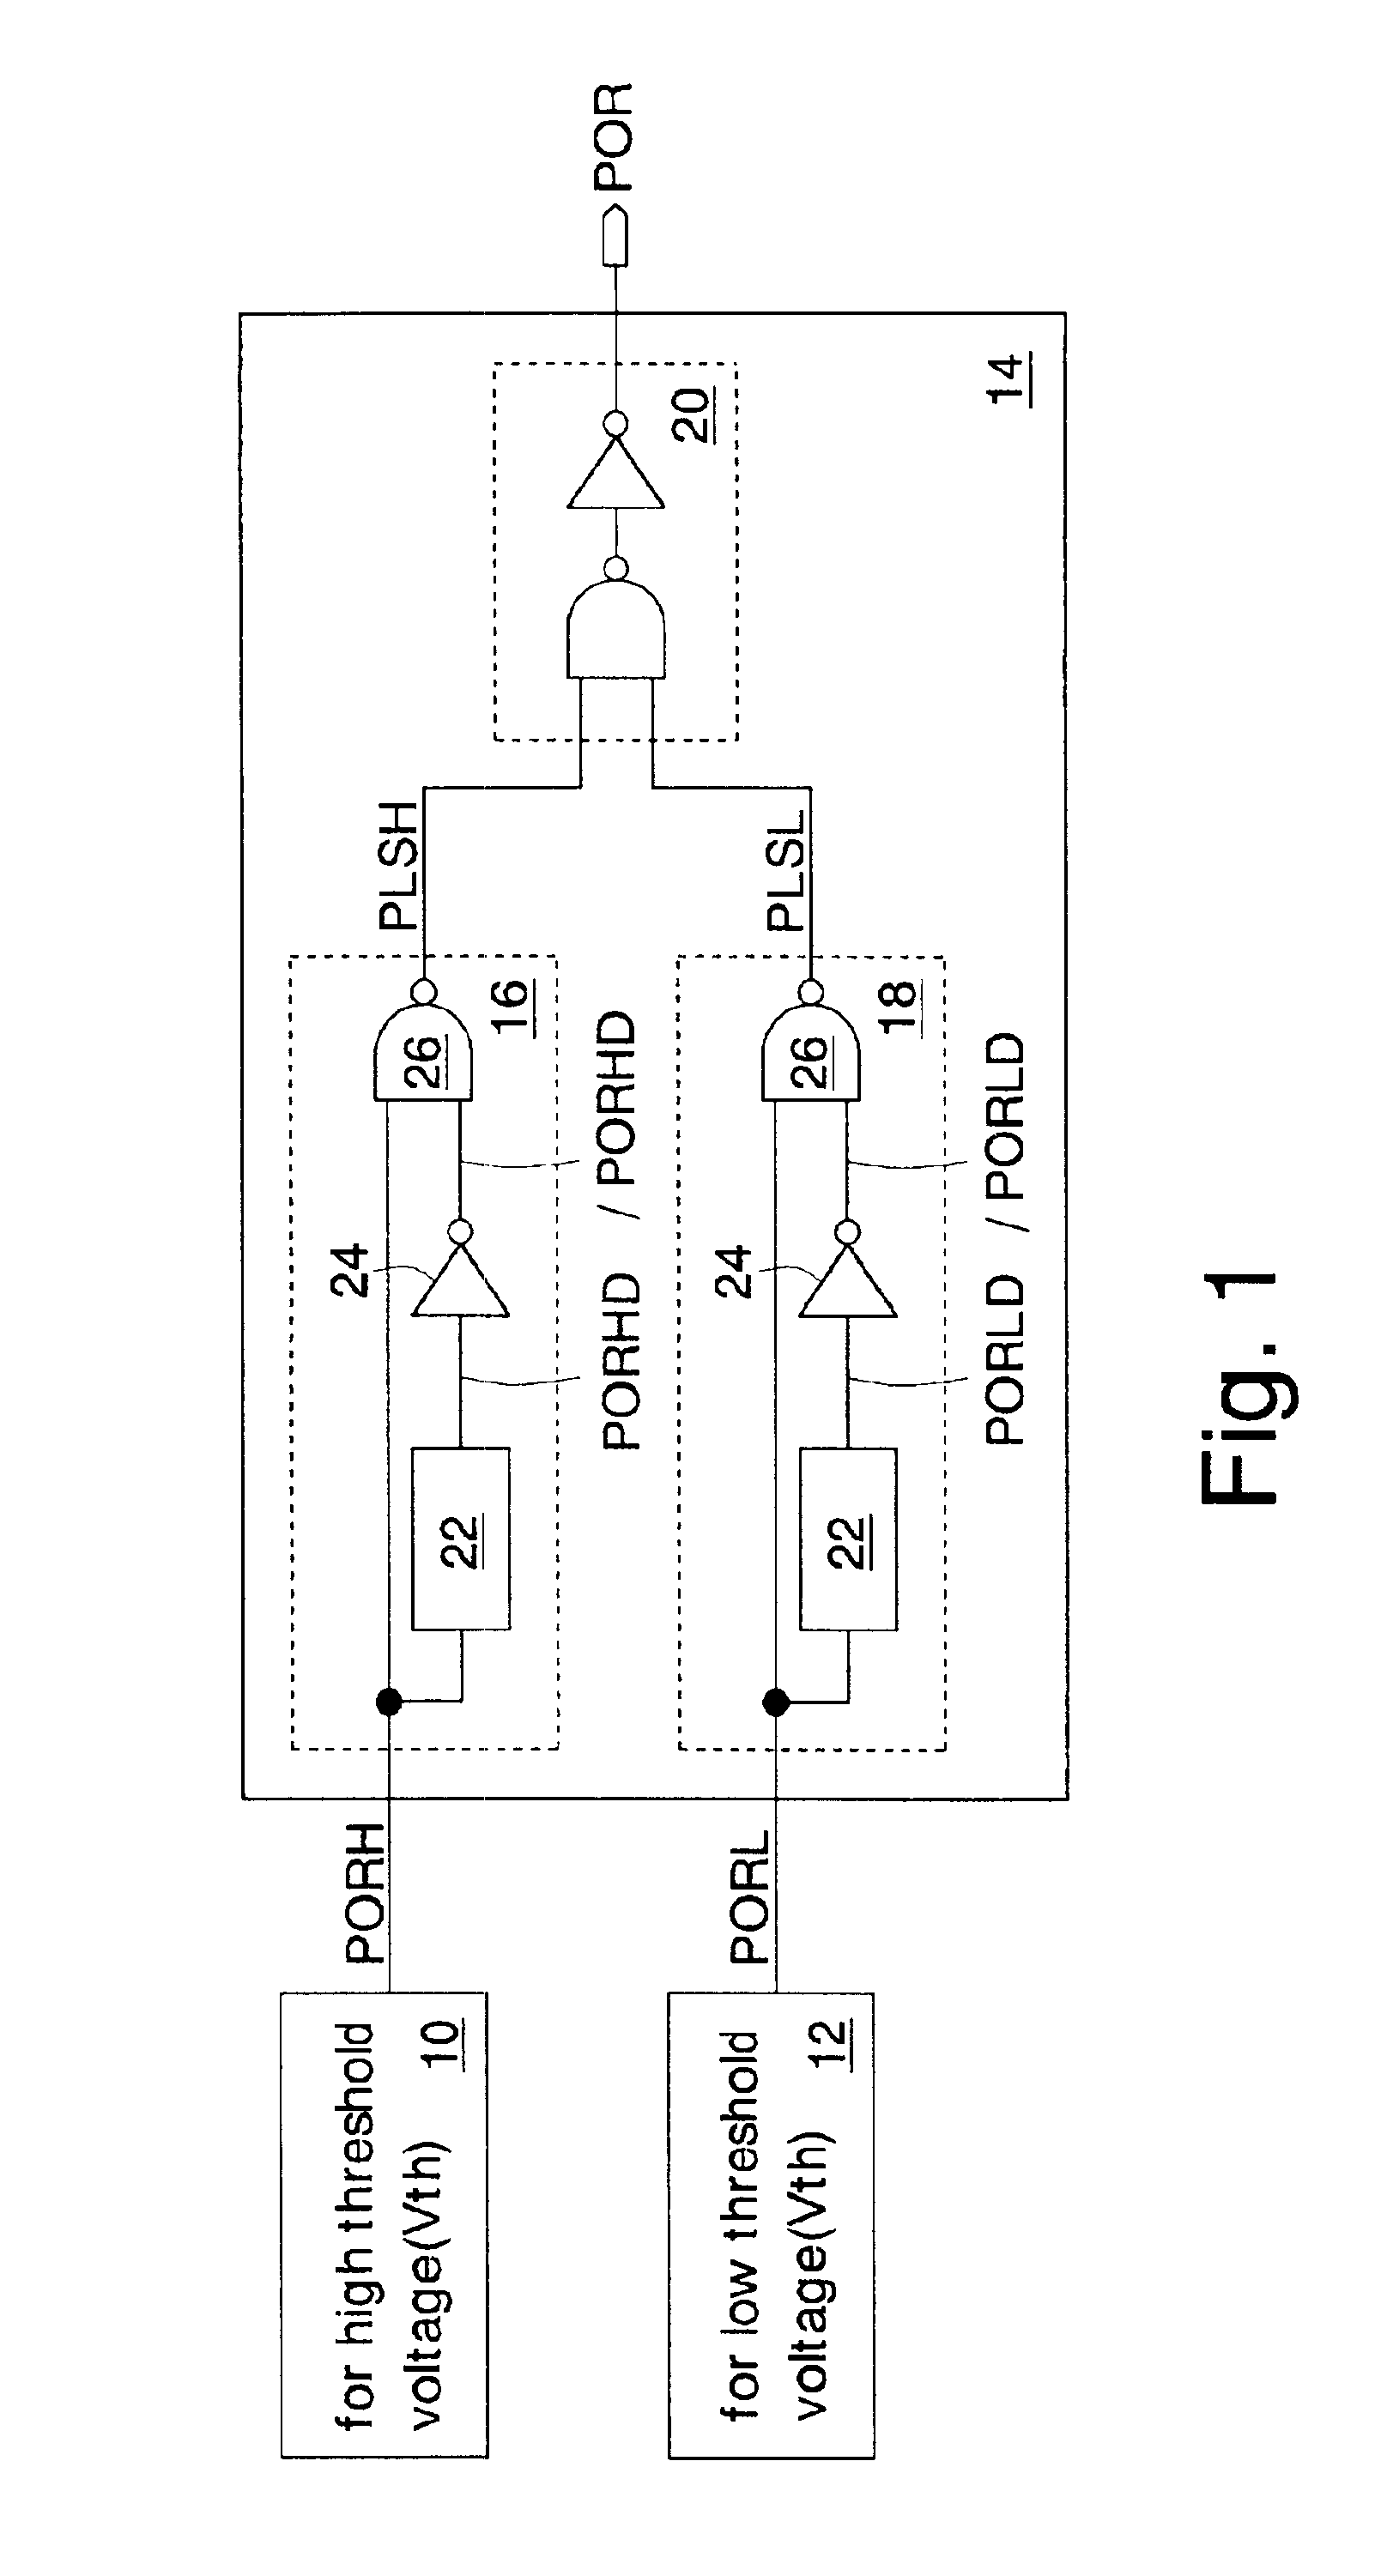 Power-on reset circuit/method for initializing an integrated circuit